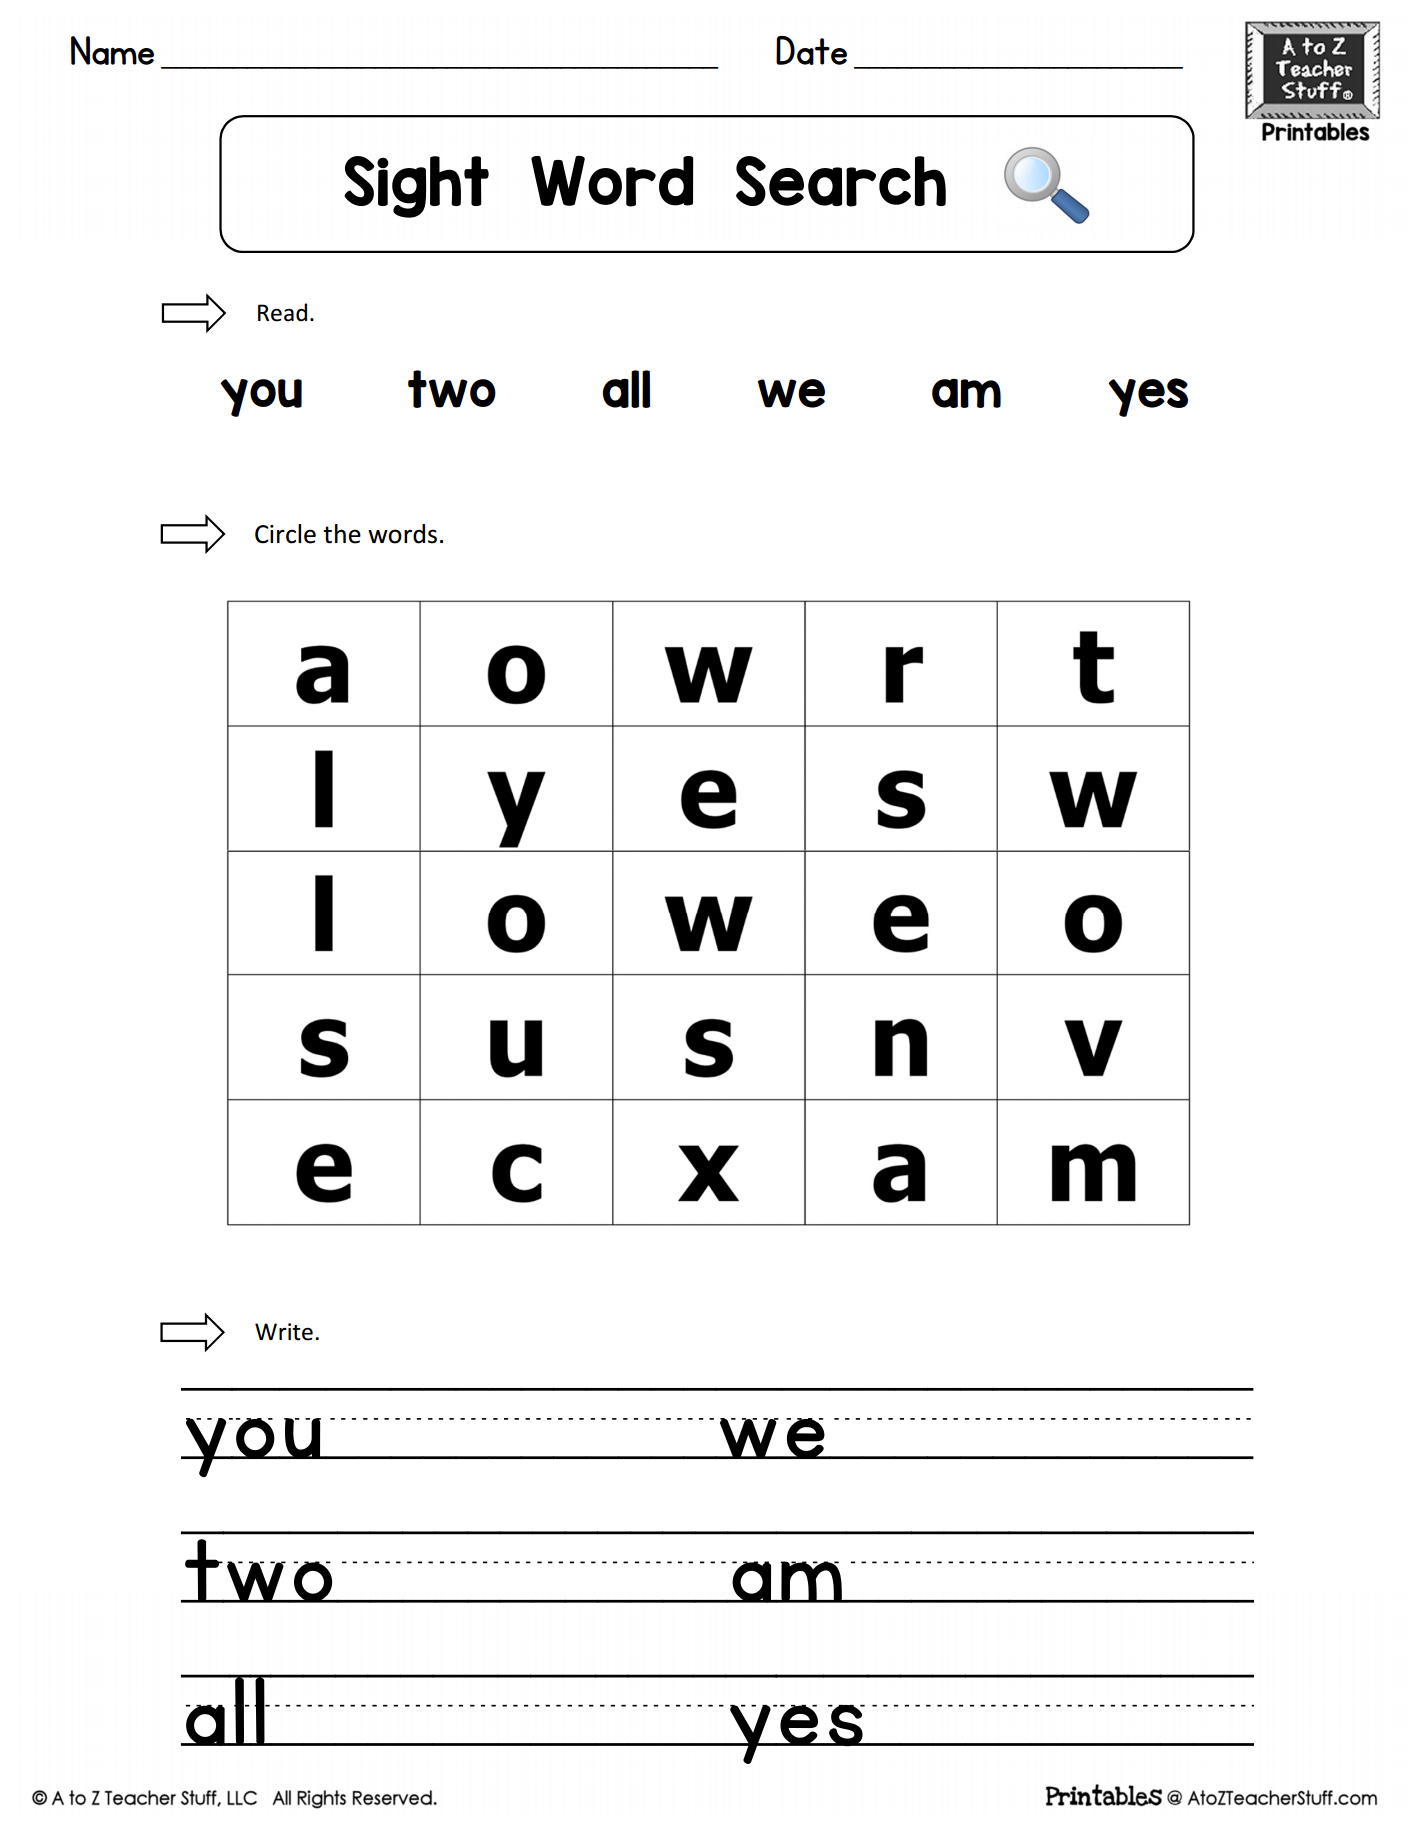 Sight Words Word Search Worksheet | A To Z Teacher Stuff Printable - Word Search Maker Free Printable